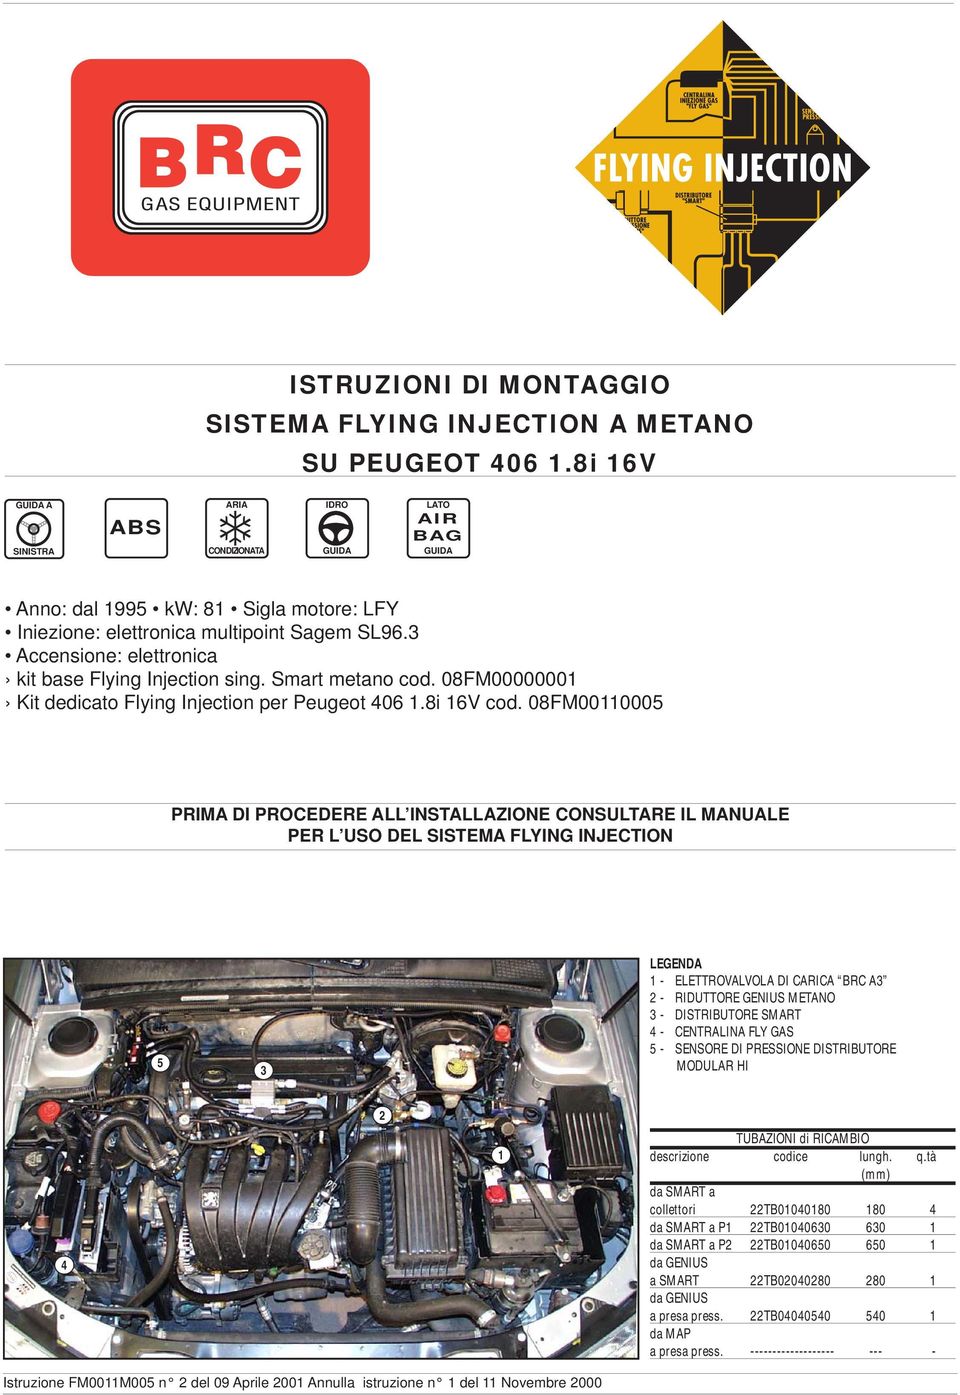 3 Accensione: elettronica kit base Flying Injection sing. Smart metano cod. 08FM00000001 Kit dedicato Flying Injection per Peugeot 406 1.8i 16V cod.